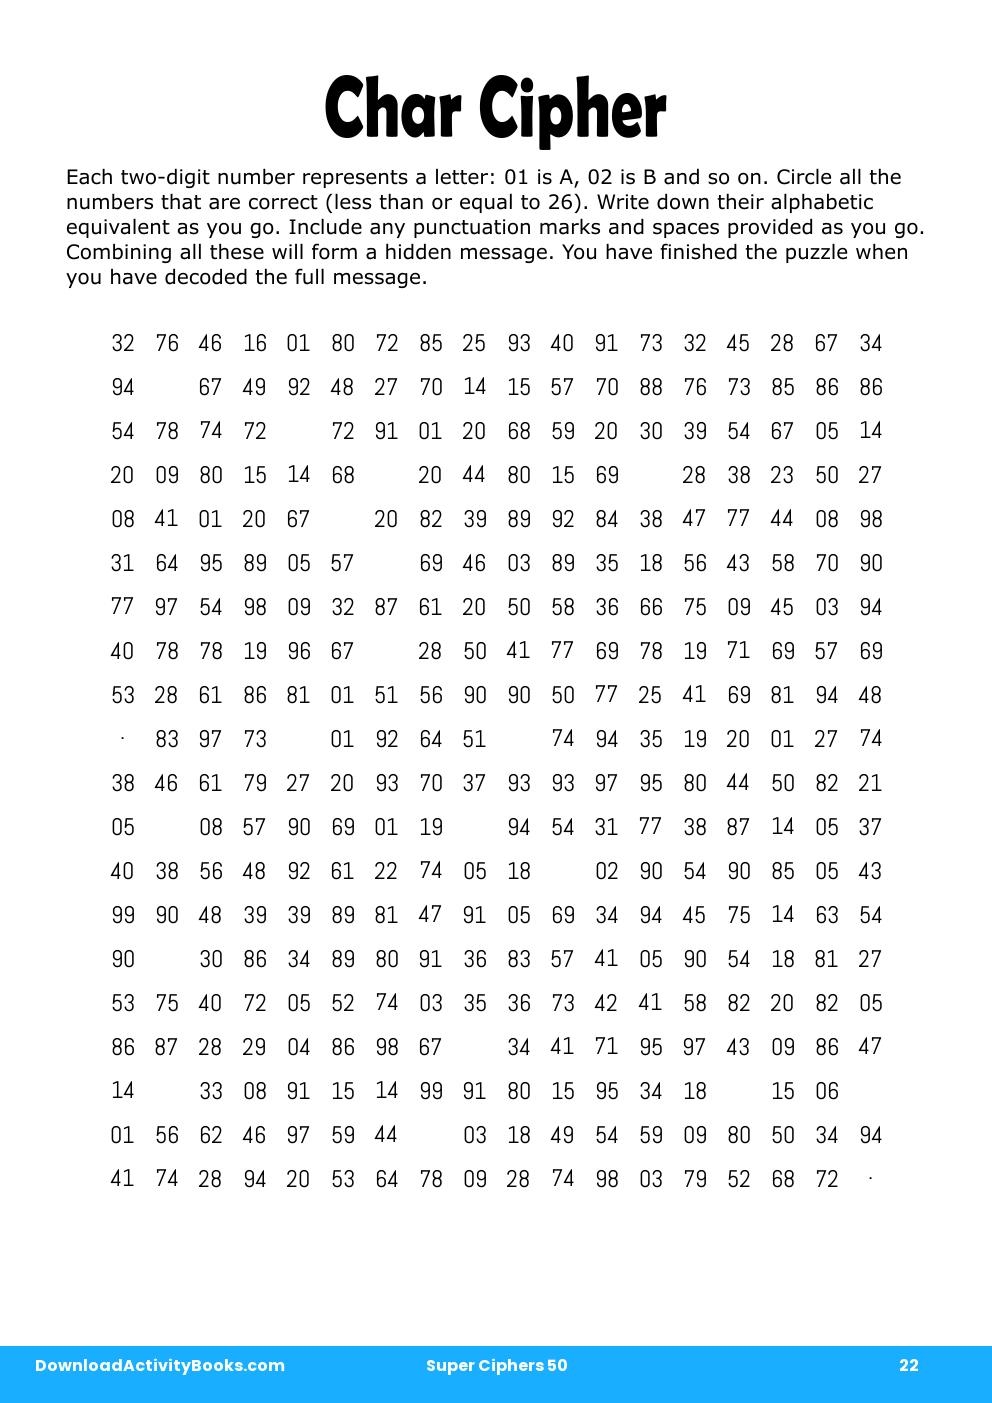 Char Cipher in Super Ciphers 50